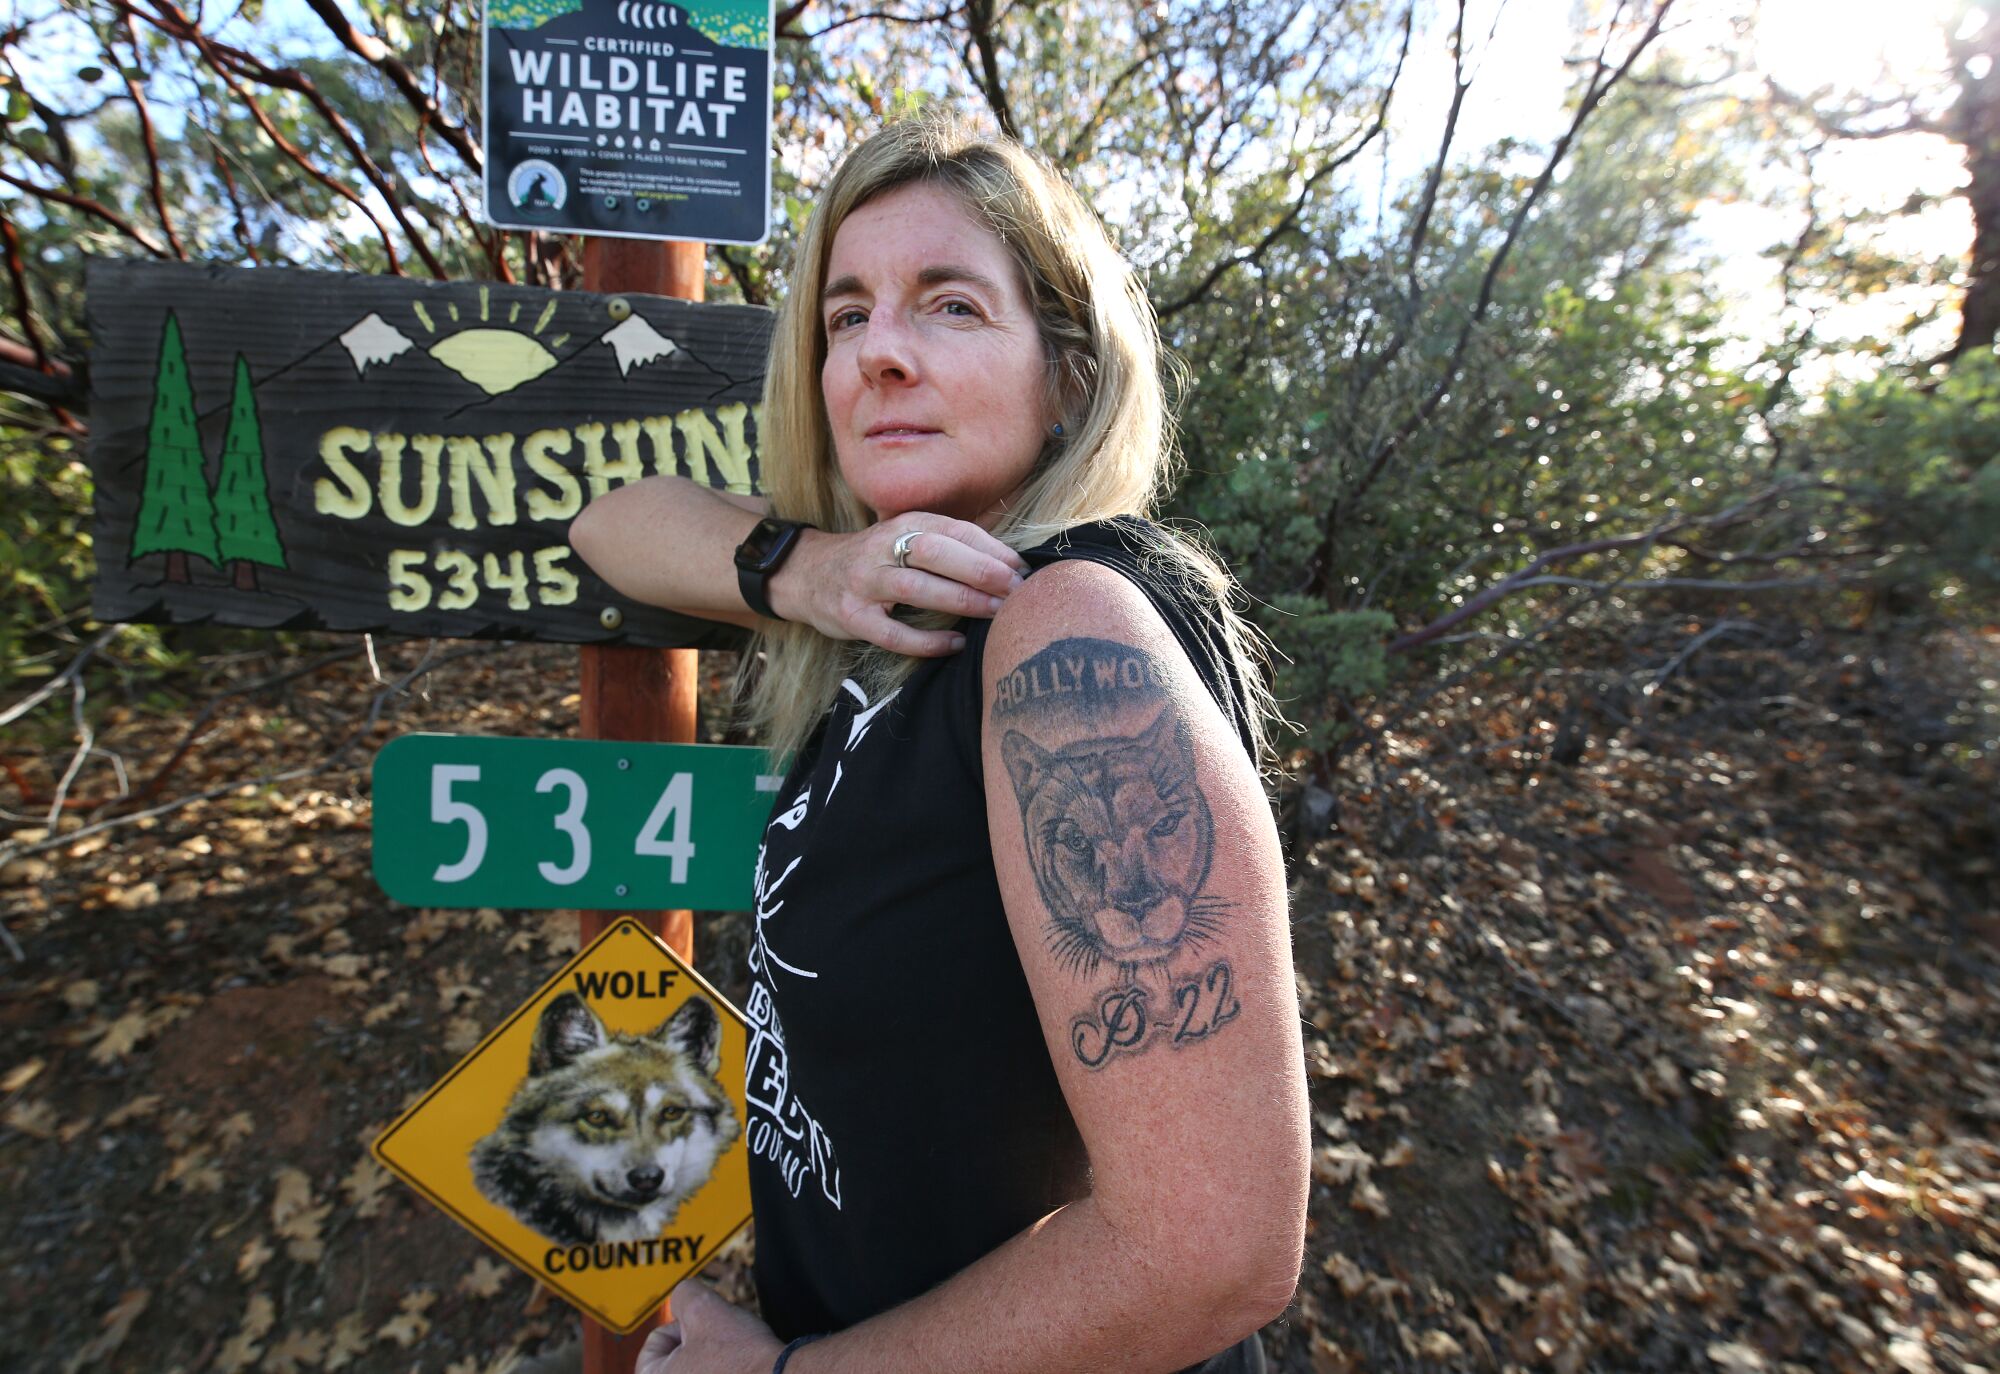 A woman shows off her tattoo of mountain lion P-22 under a tattoo of the Hollywood sign